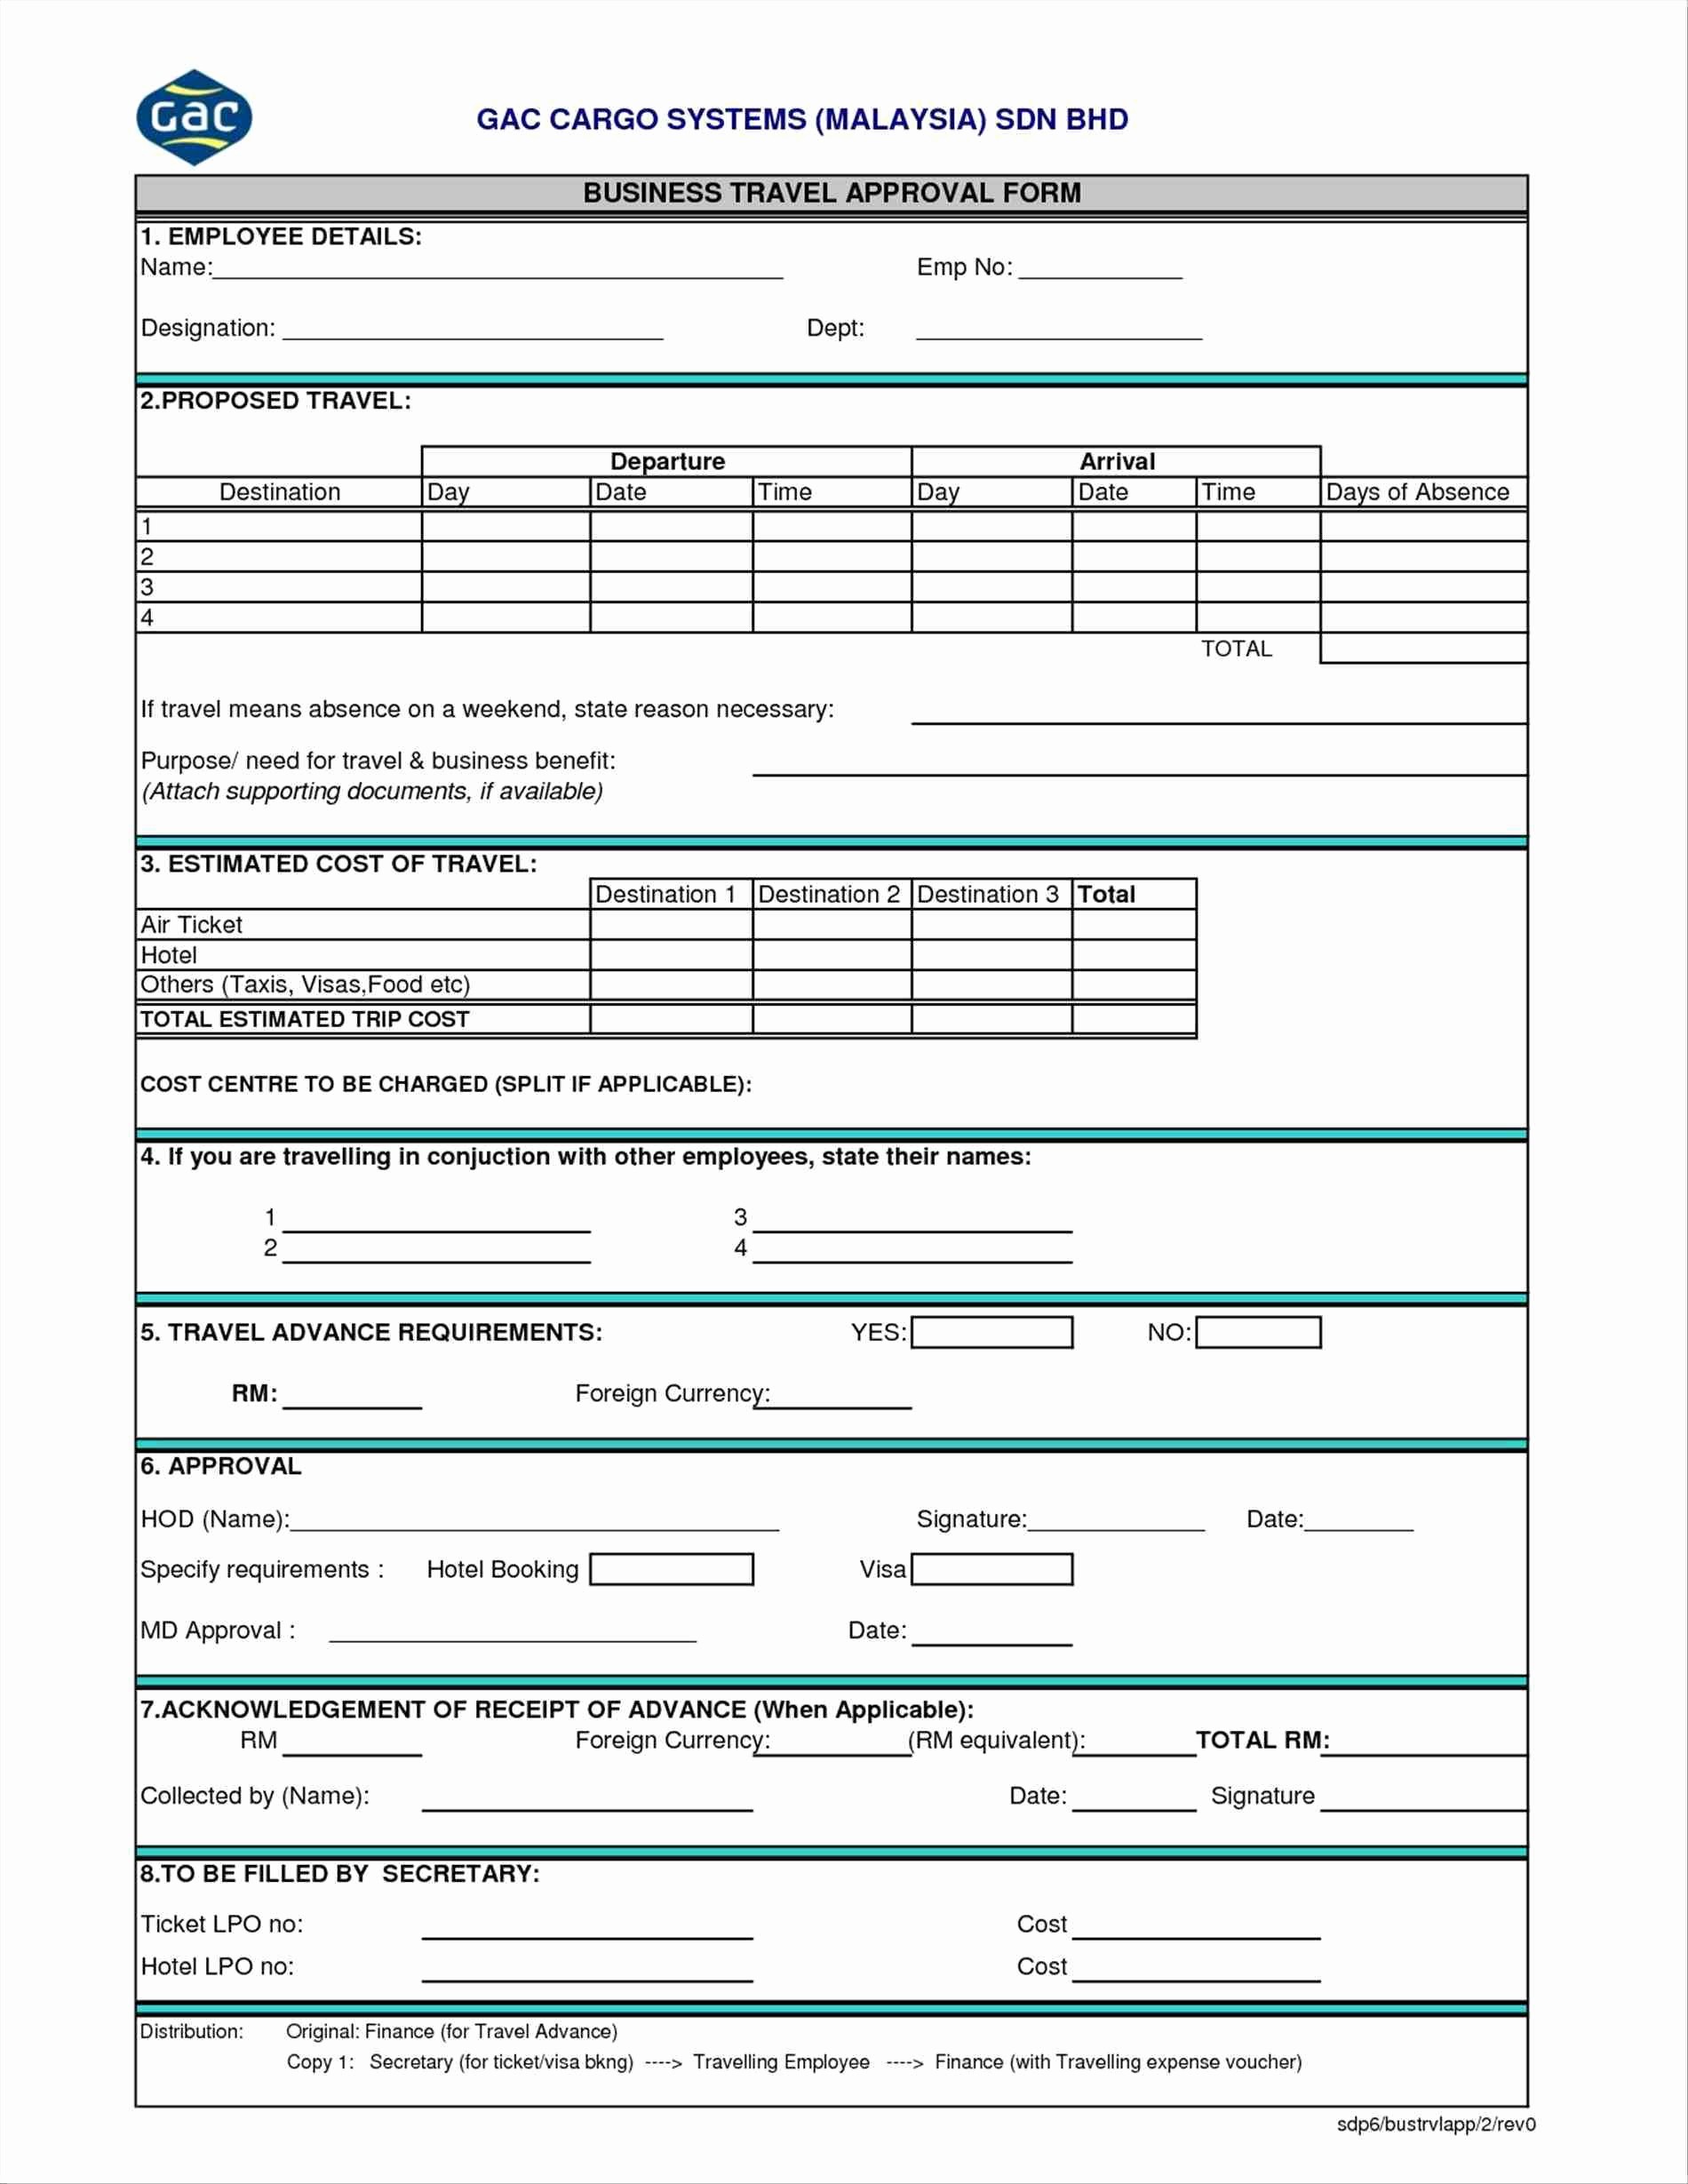 Travel Advance Request form Template Best Of How to Fill Out Travel Advance Request form Navy